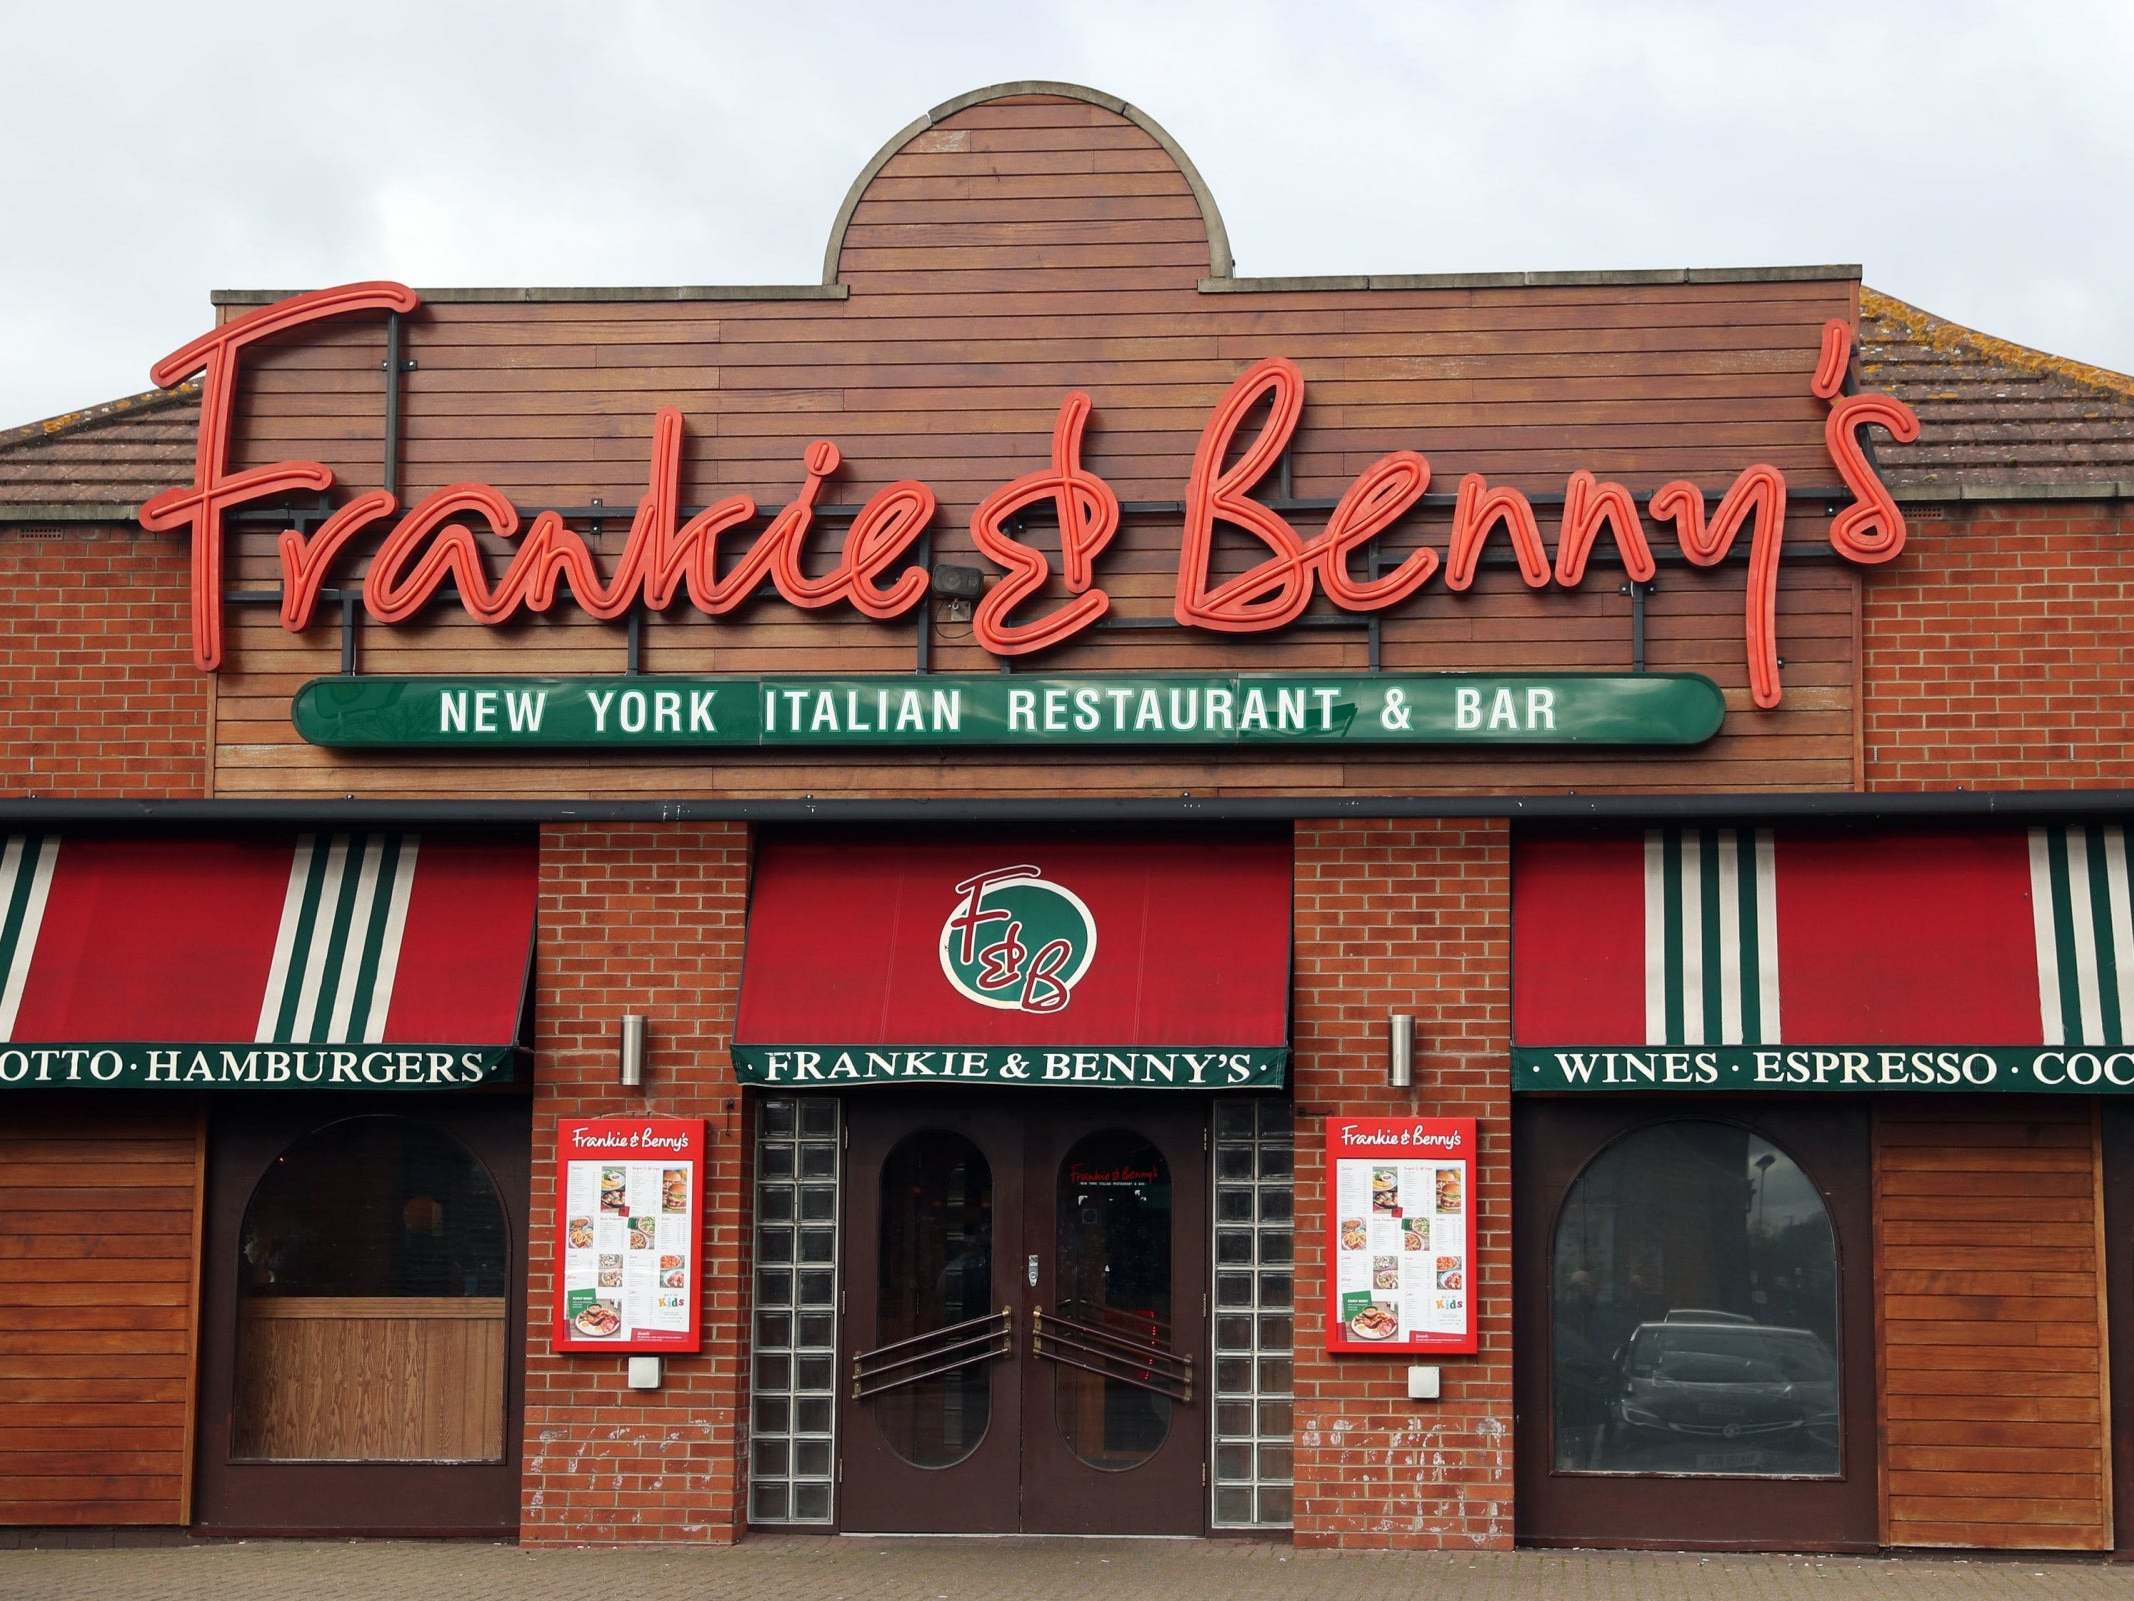 Casual dining chains like Frankie & Benny's are facing a tough period